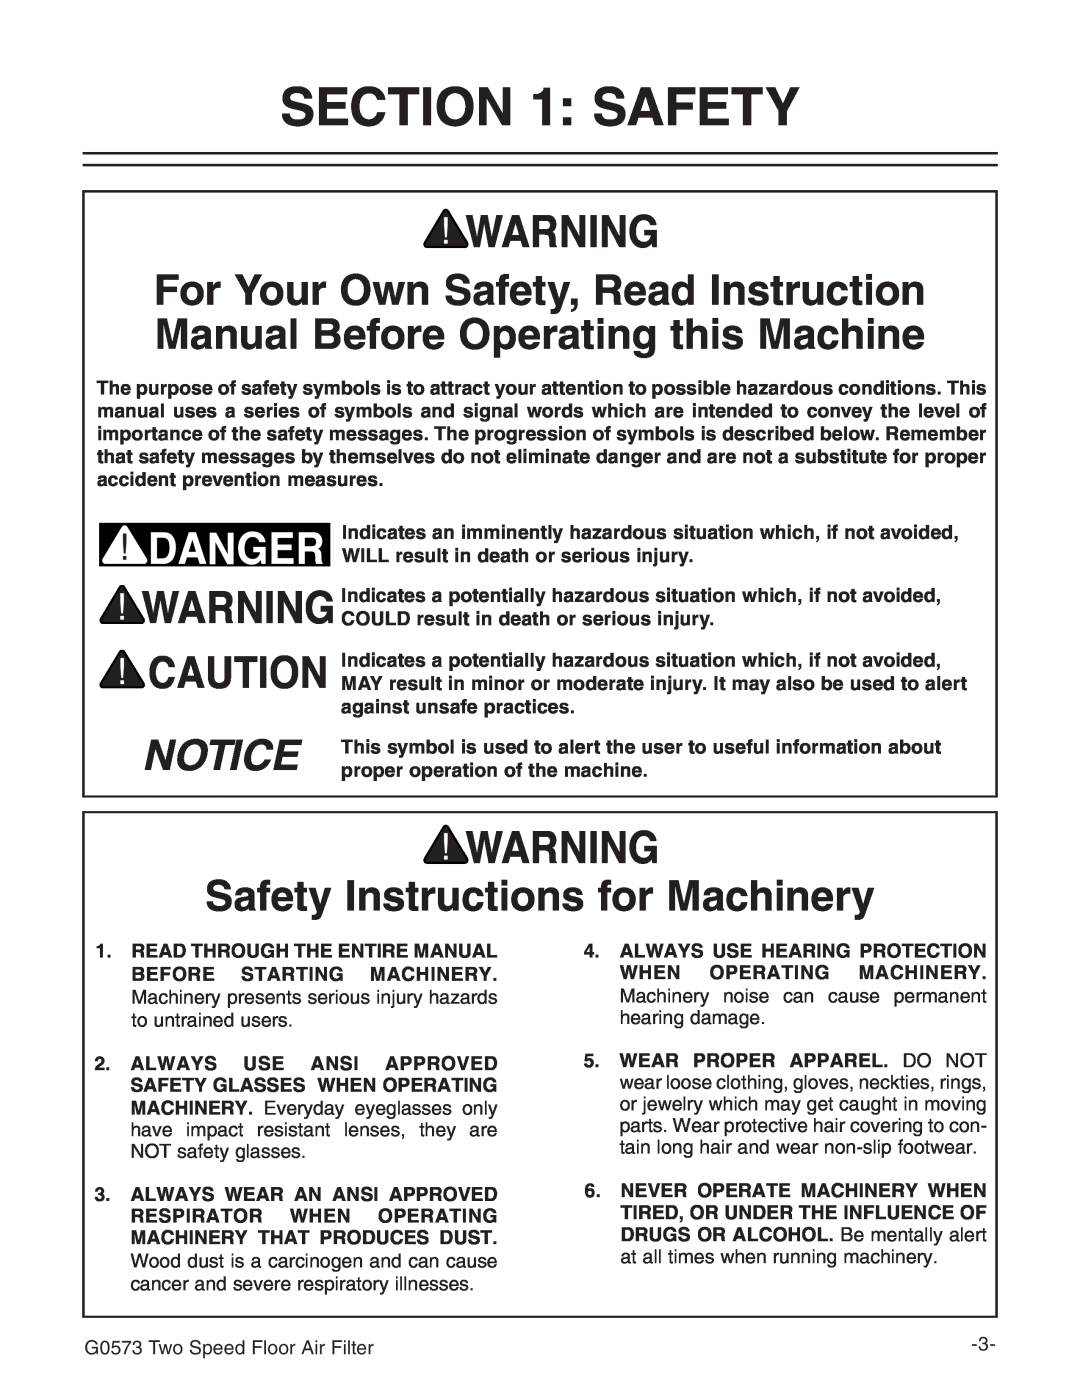 Grizzly G0573 instruction manual Safety Instructions for Machinery 